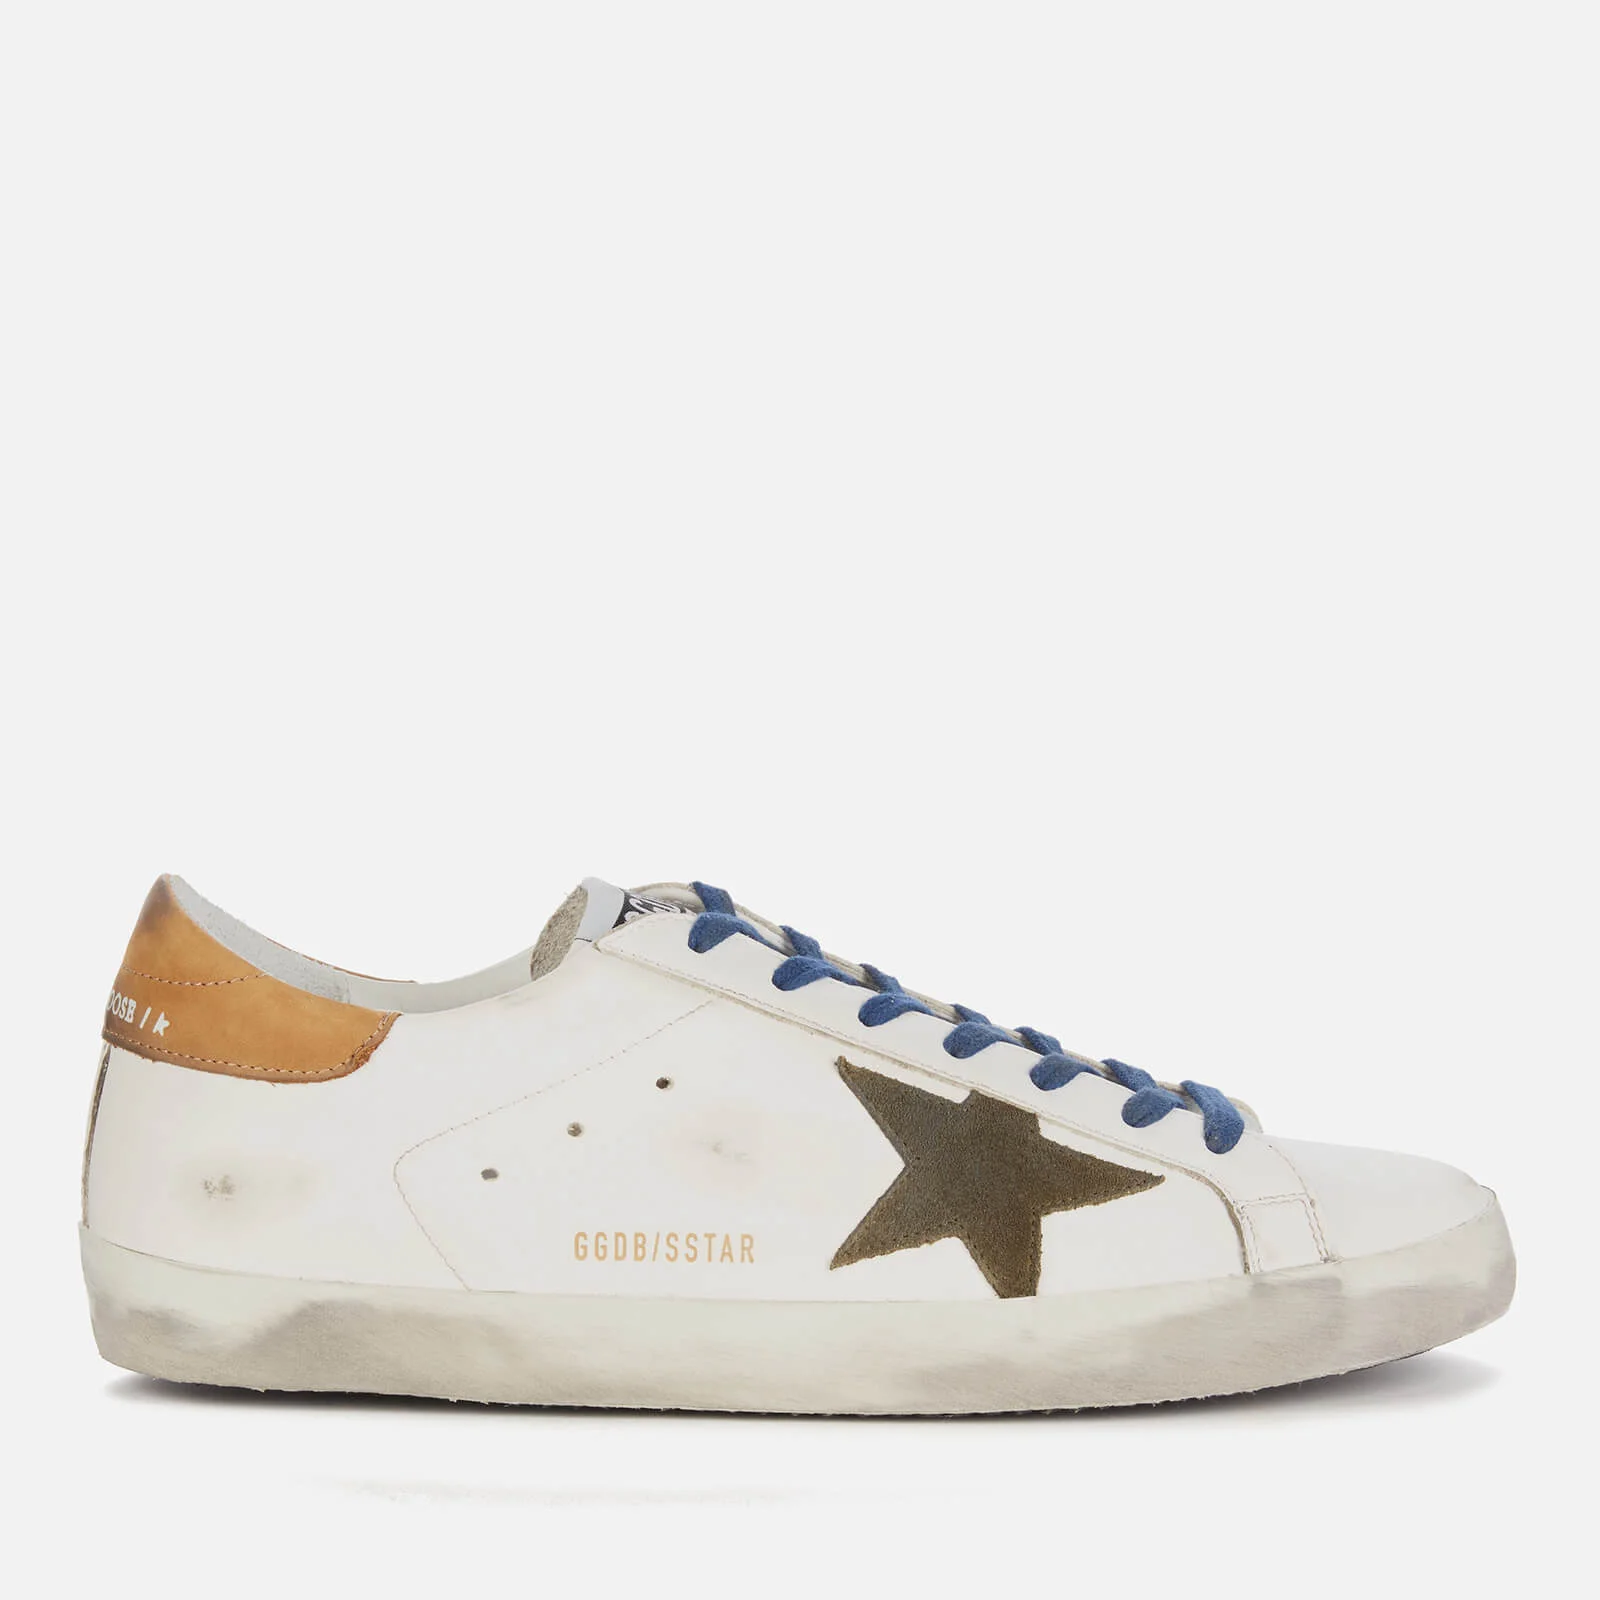 Golden Goose Men's Superstar Leather Trainers - White/Drill Green/Brown Image 1